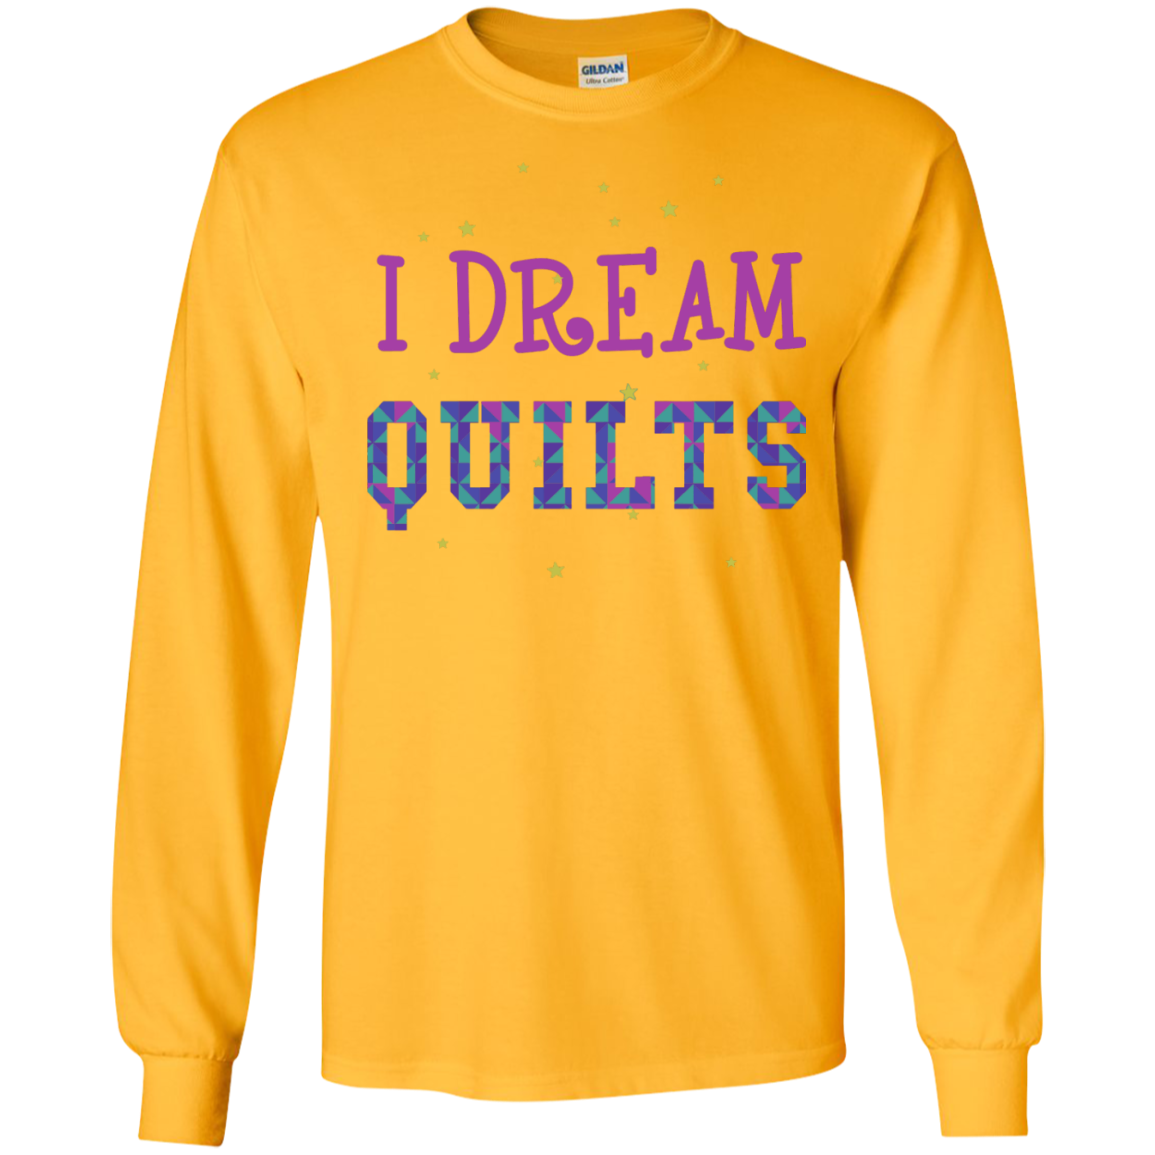 I Dream Quilts Long Sleeve Ultra Cotton T-Shirt - Crafter4Life - 1